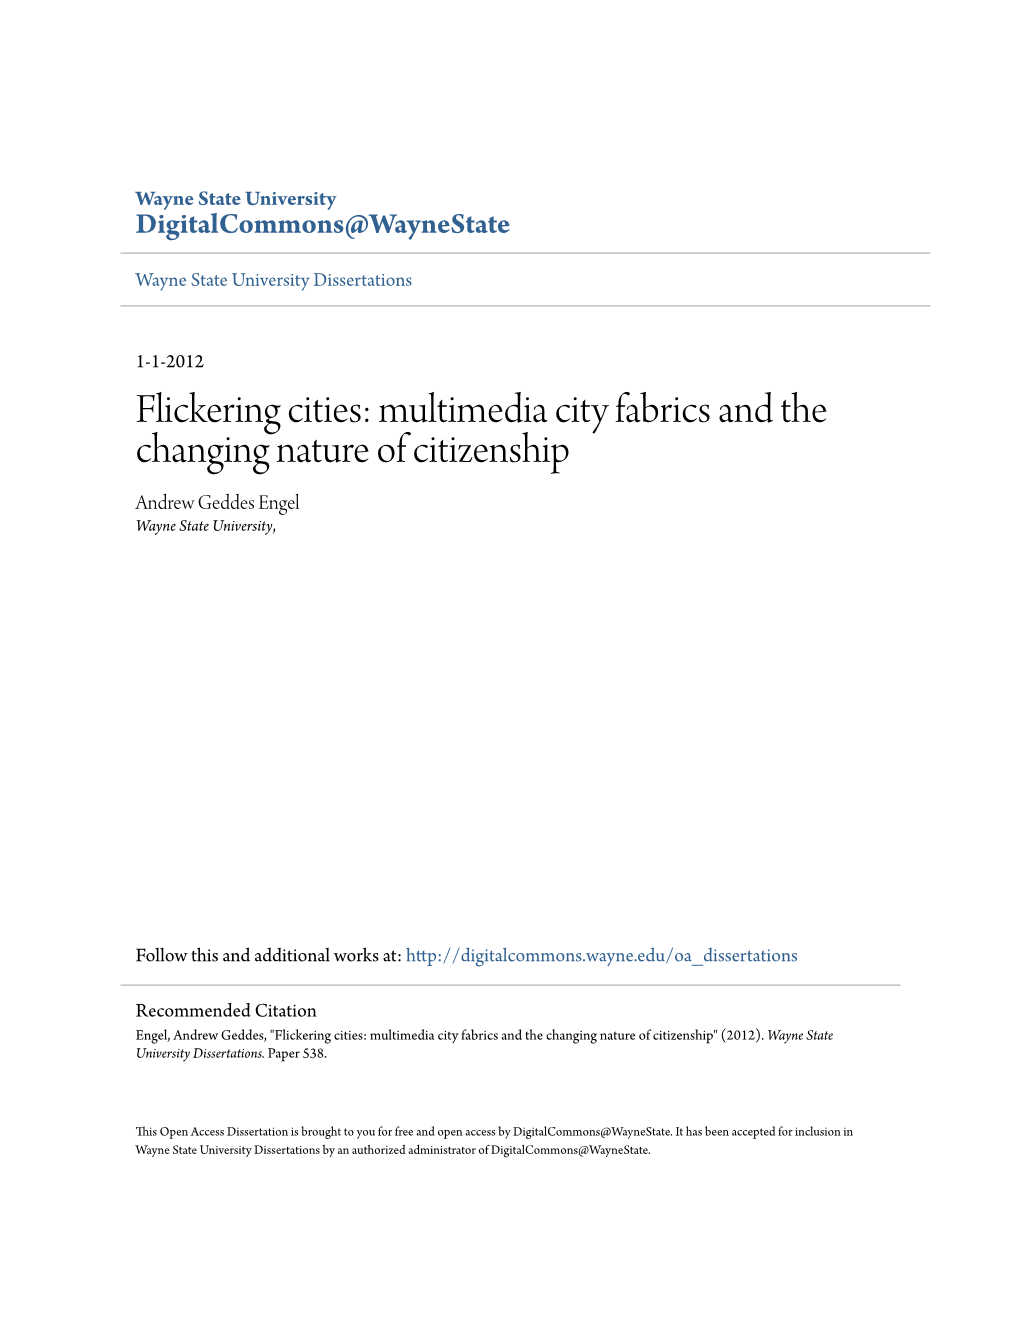 Flickering Cities: Multimedia City Fabrics and the Changing Nature of Citizenship Andrew Geddes Engel Wayne State University